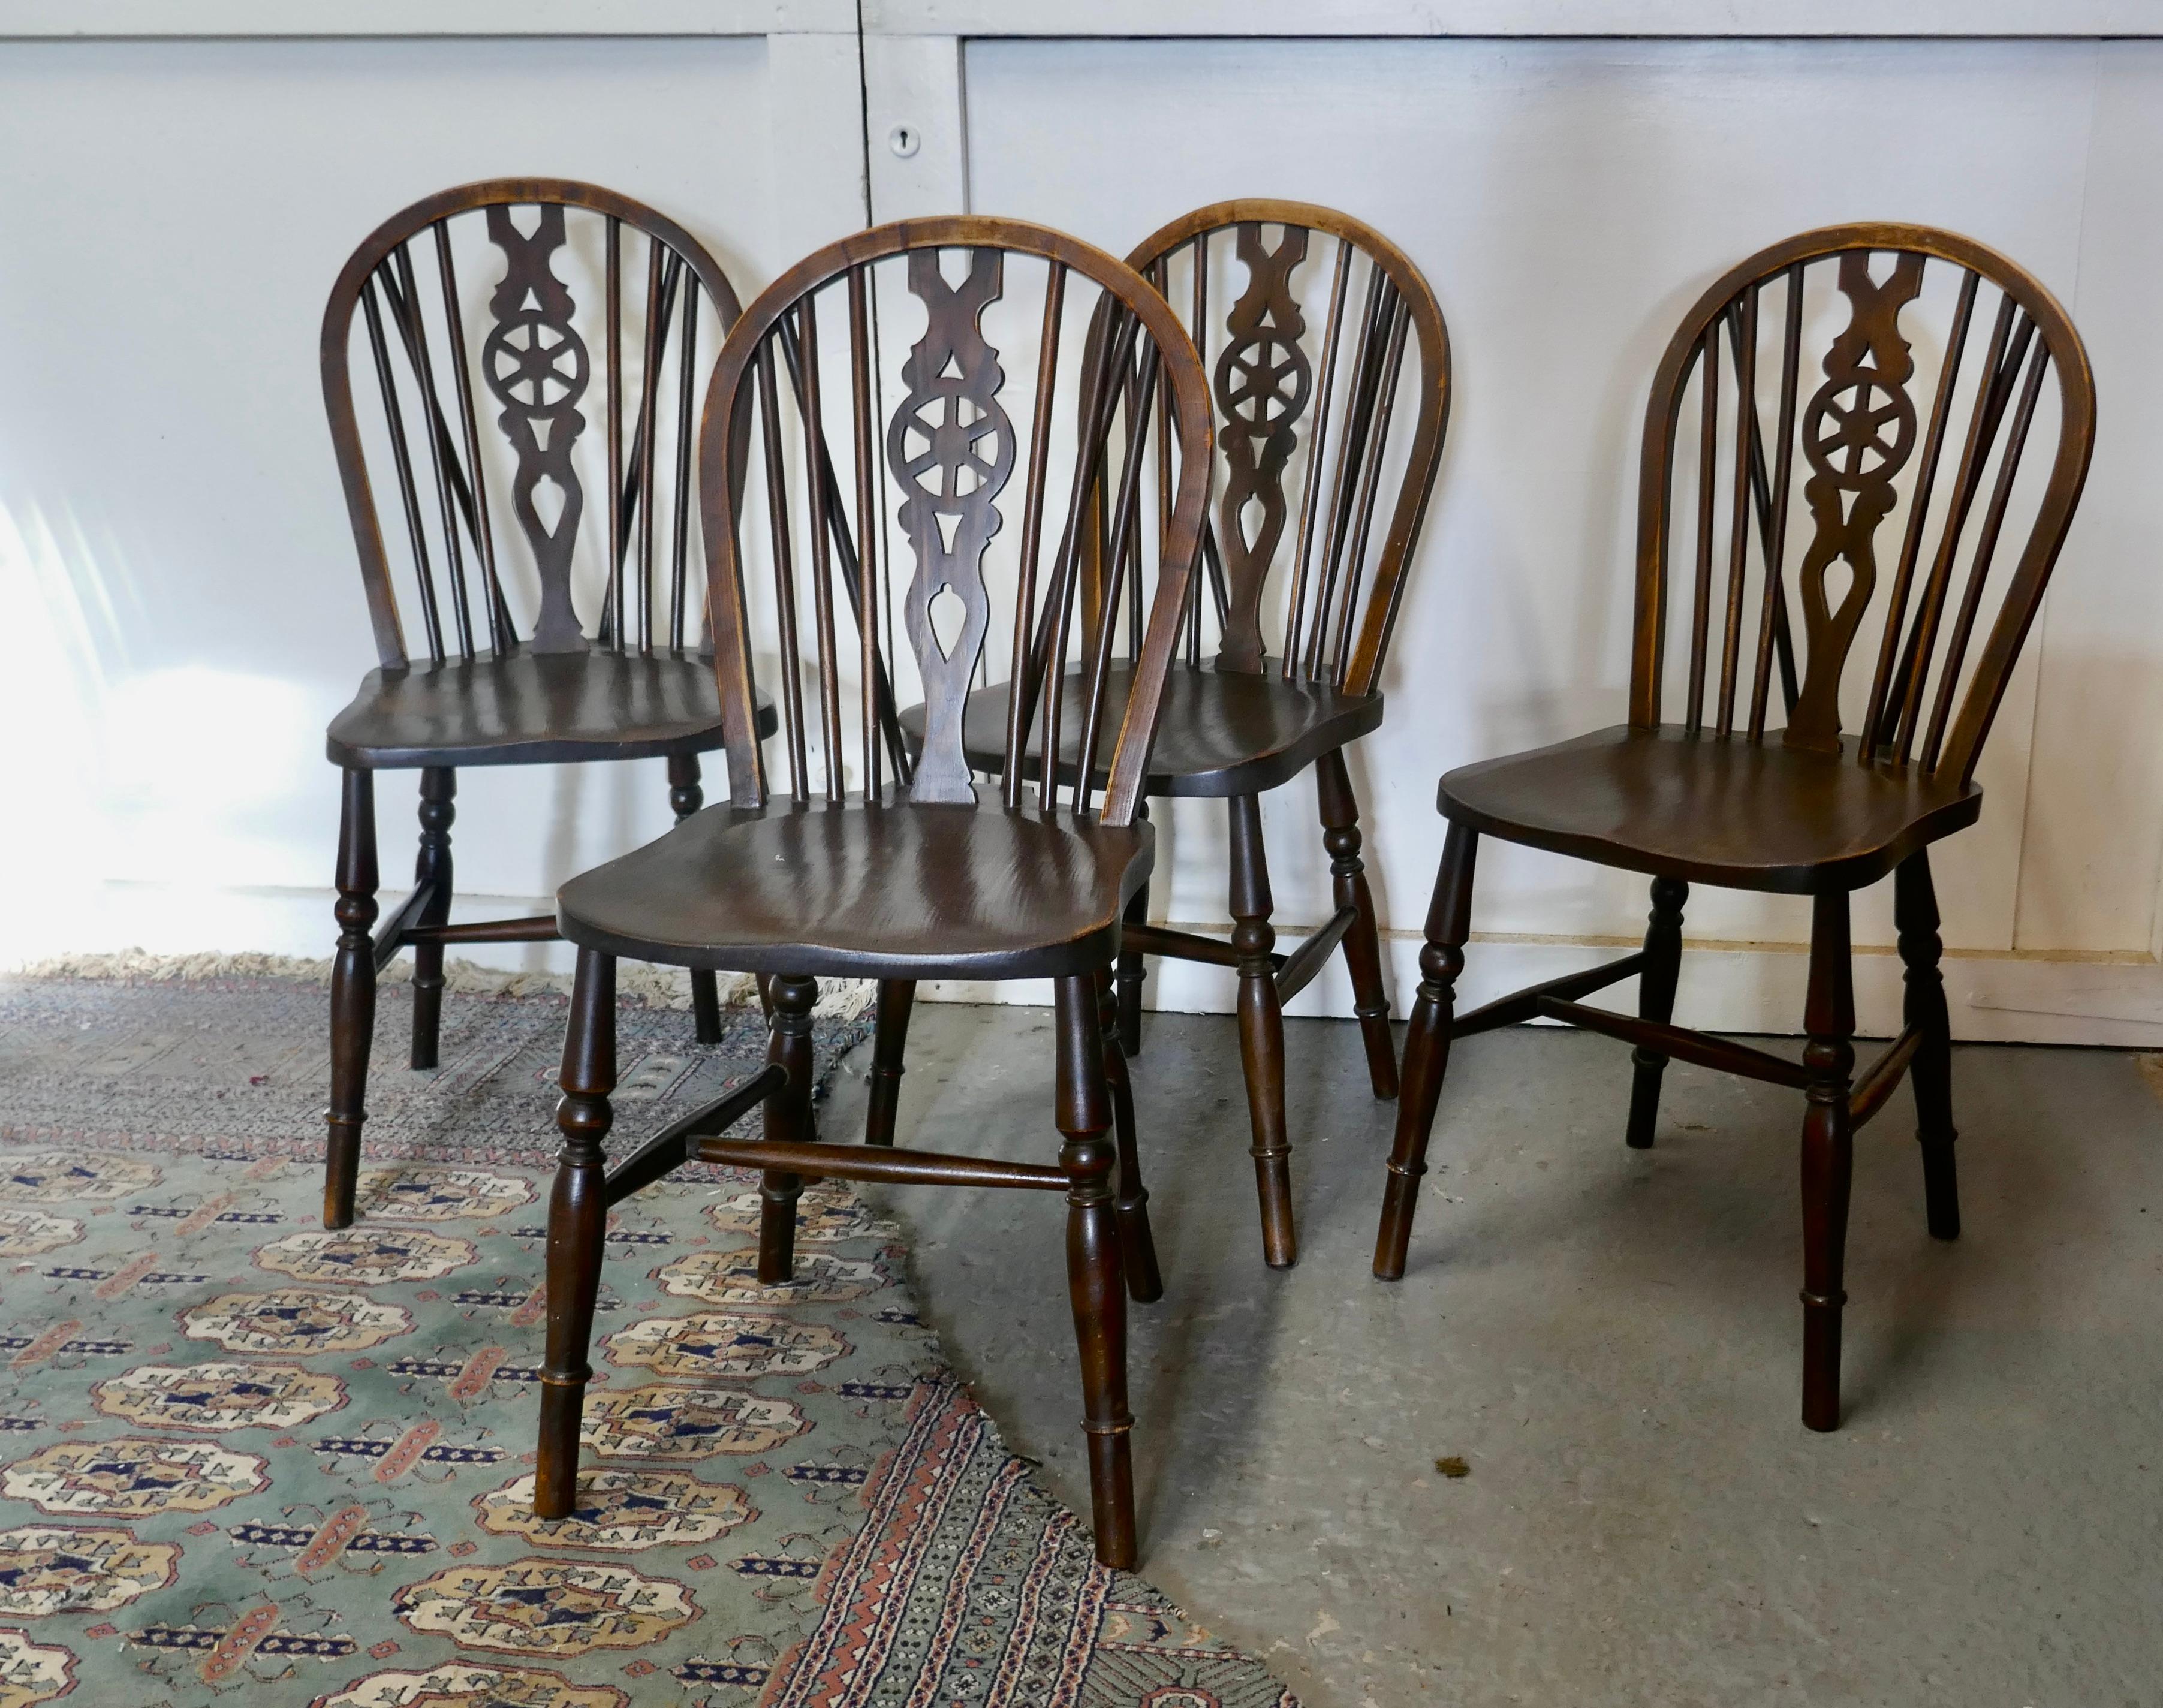 A Set of 4 Beech & Elm Wheel Back Windsor Kitchen Dining Chairs


The chairs are a classic design and traditionally made from solid wood they have hooped wedge backs in the traditional Windsor style with spindles and a pierced centre splat in the